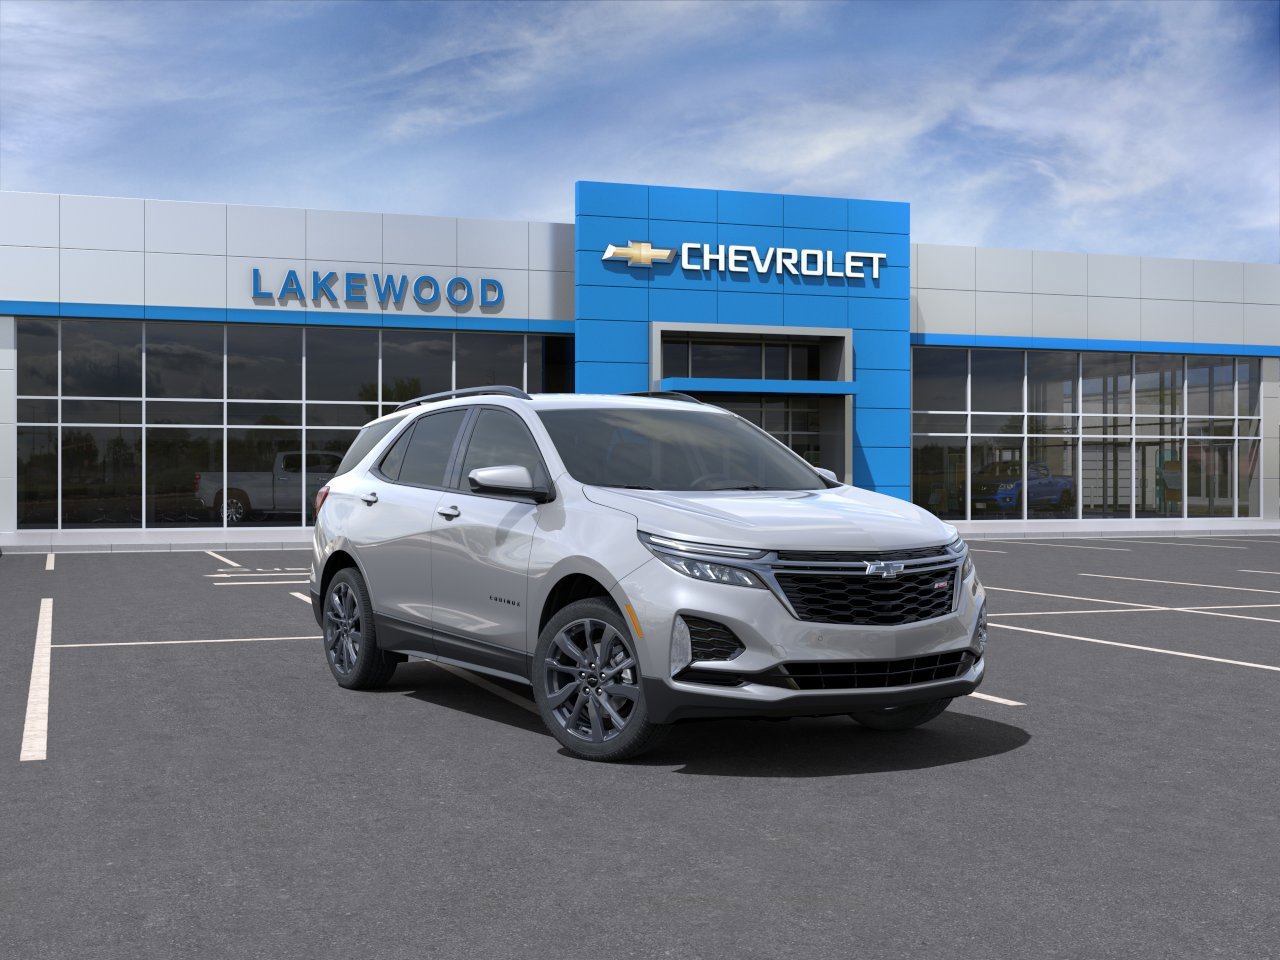 how-to-change-voice-recognition-language-to-english-on-chevy-equinox